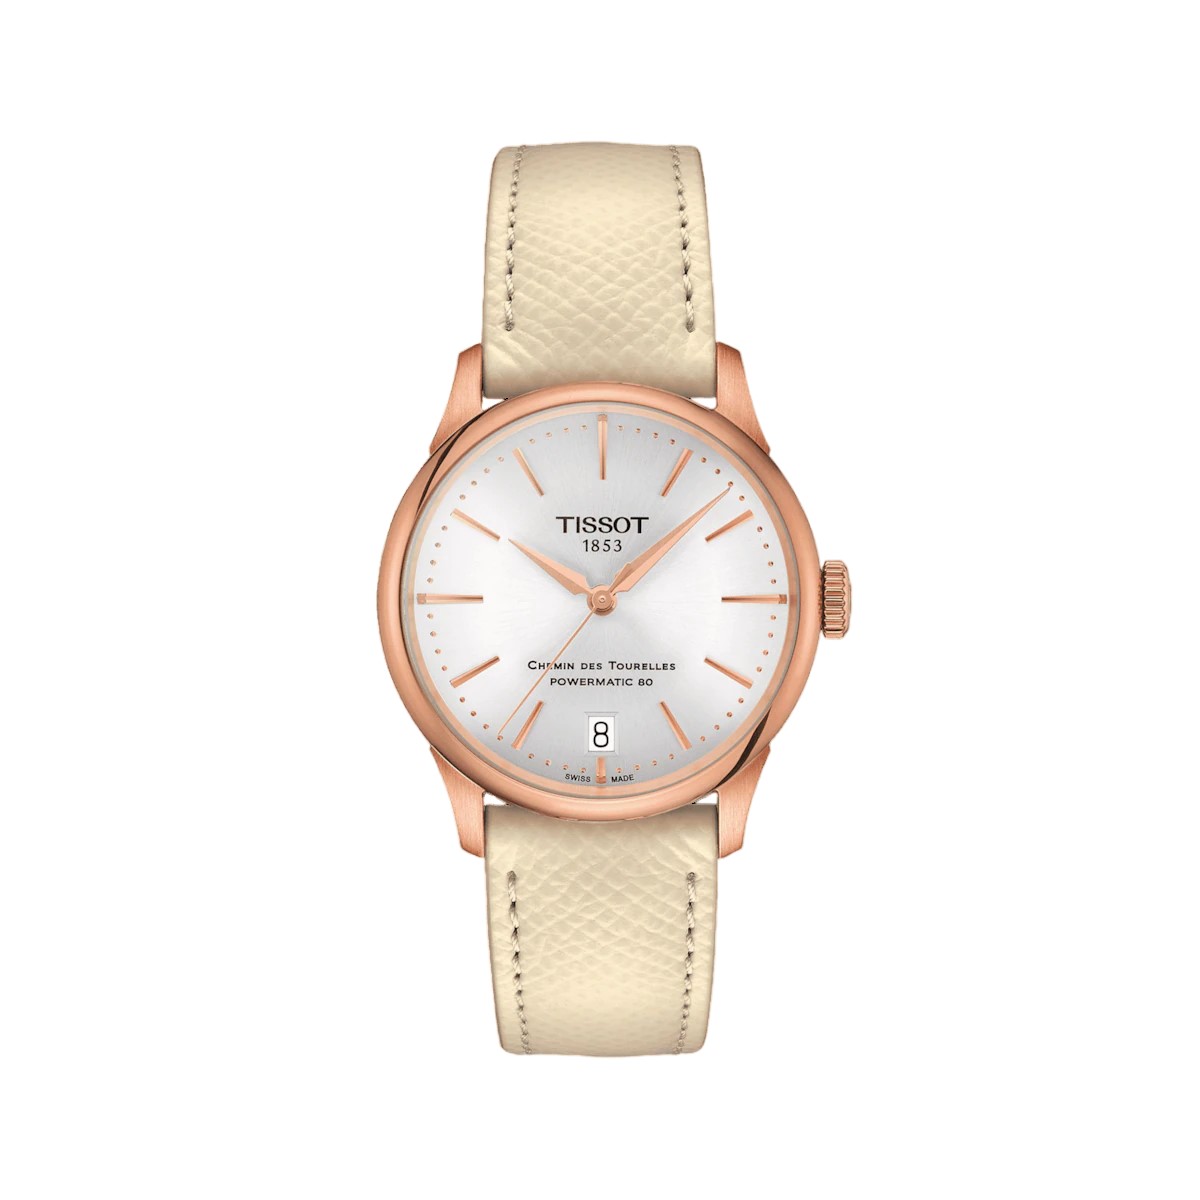 Tissot Women's Swiss Automatic Chemin Des Tourelles Powermatic 80 White Leather Strap Watch 34mm In Beige / Cream / Gold / Gold Tone / Rose / Rose Gold / Rose Gold Tone / Silver